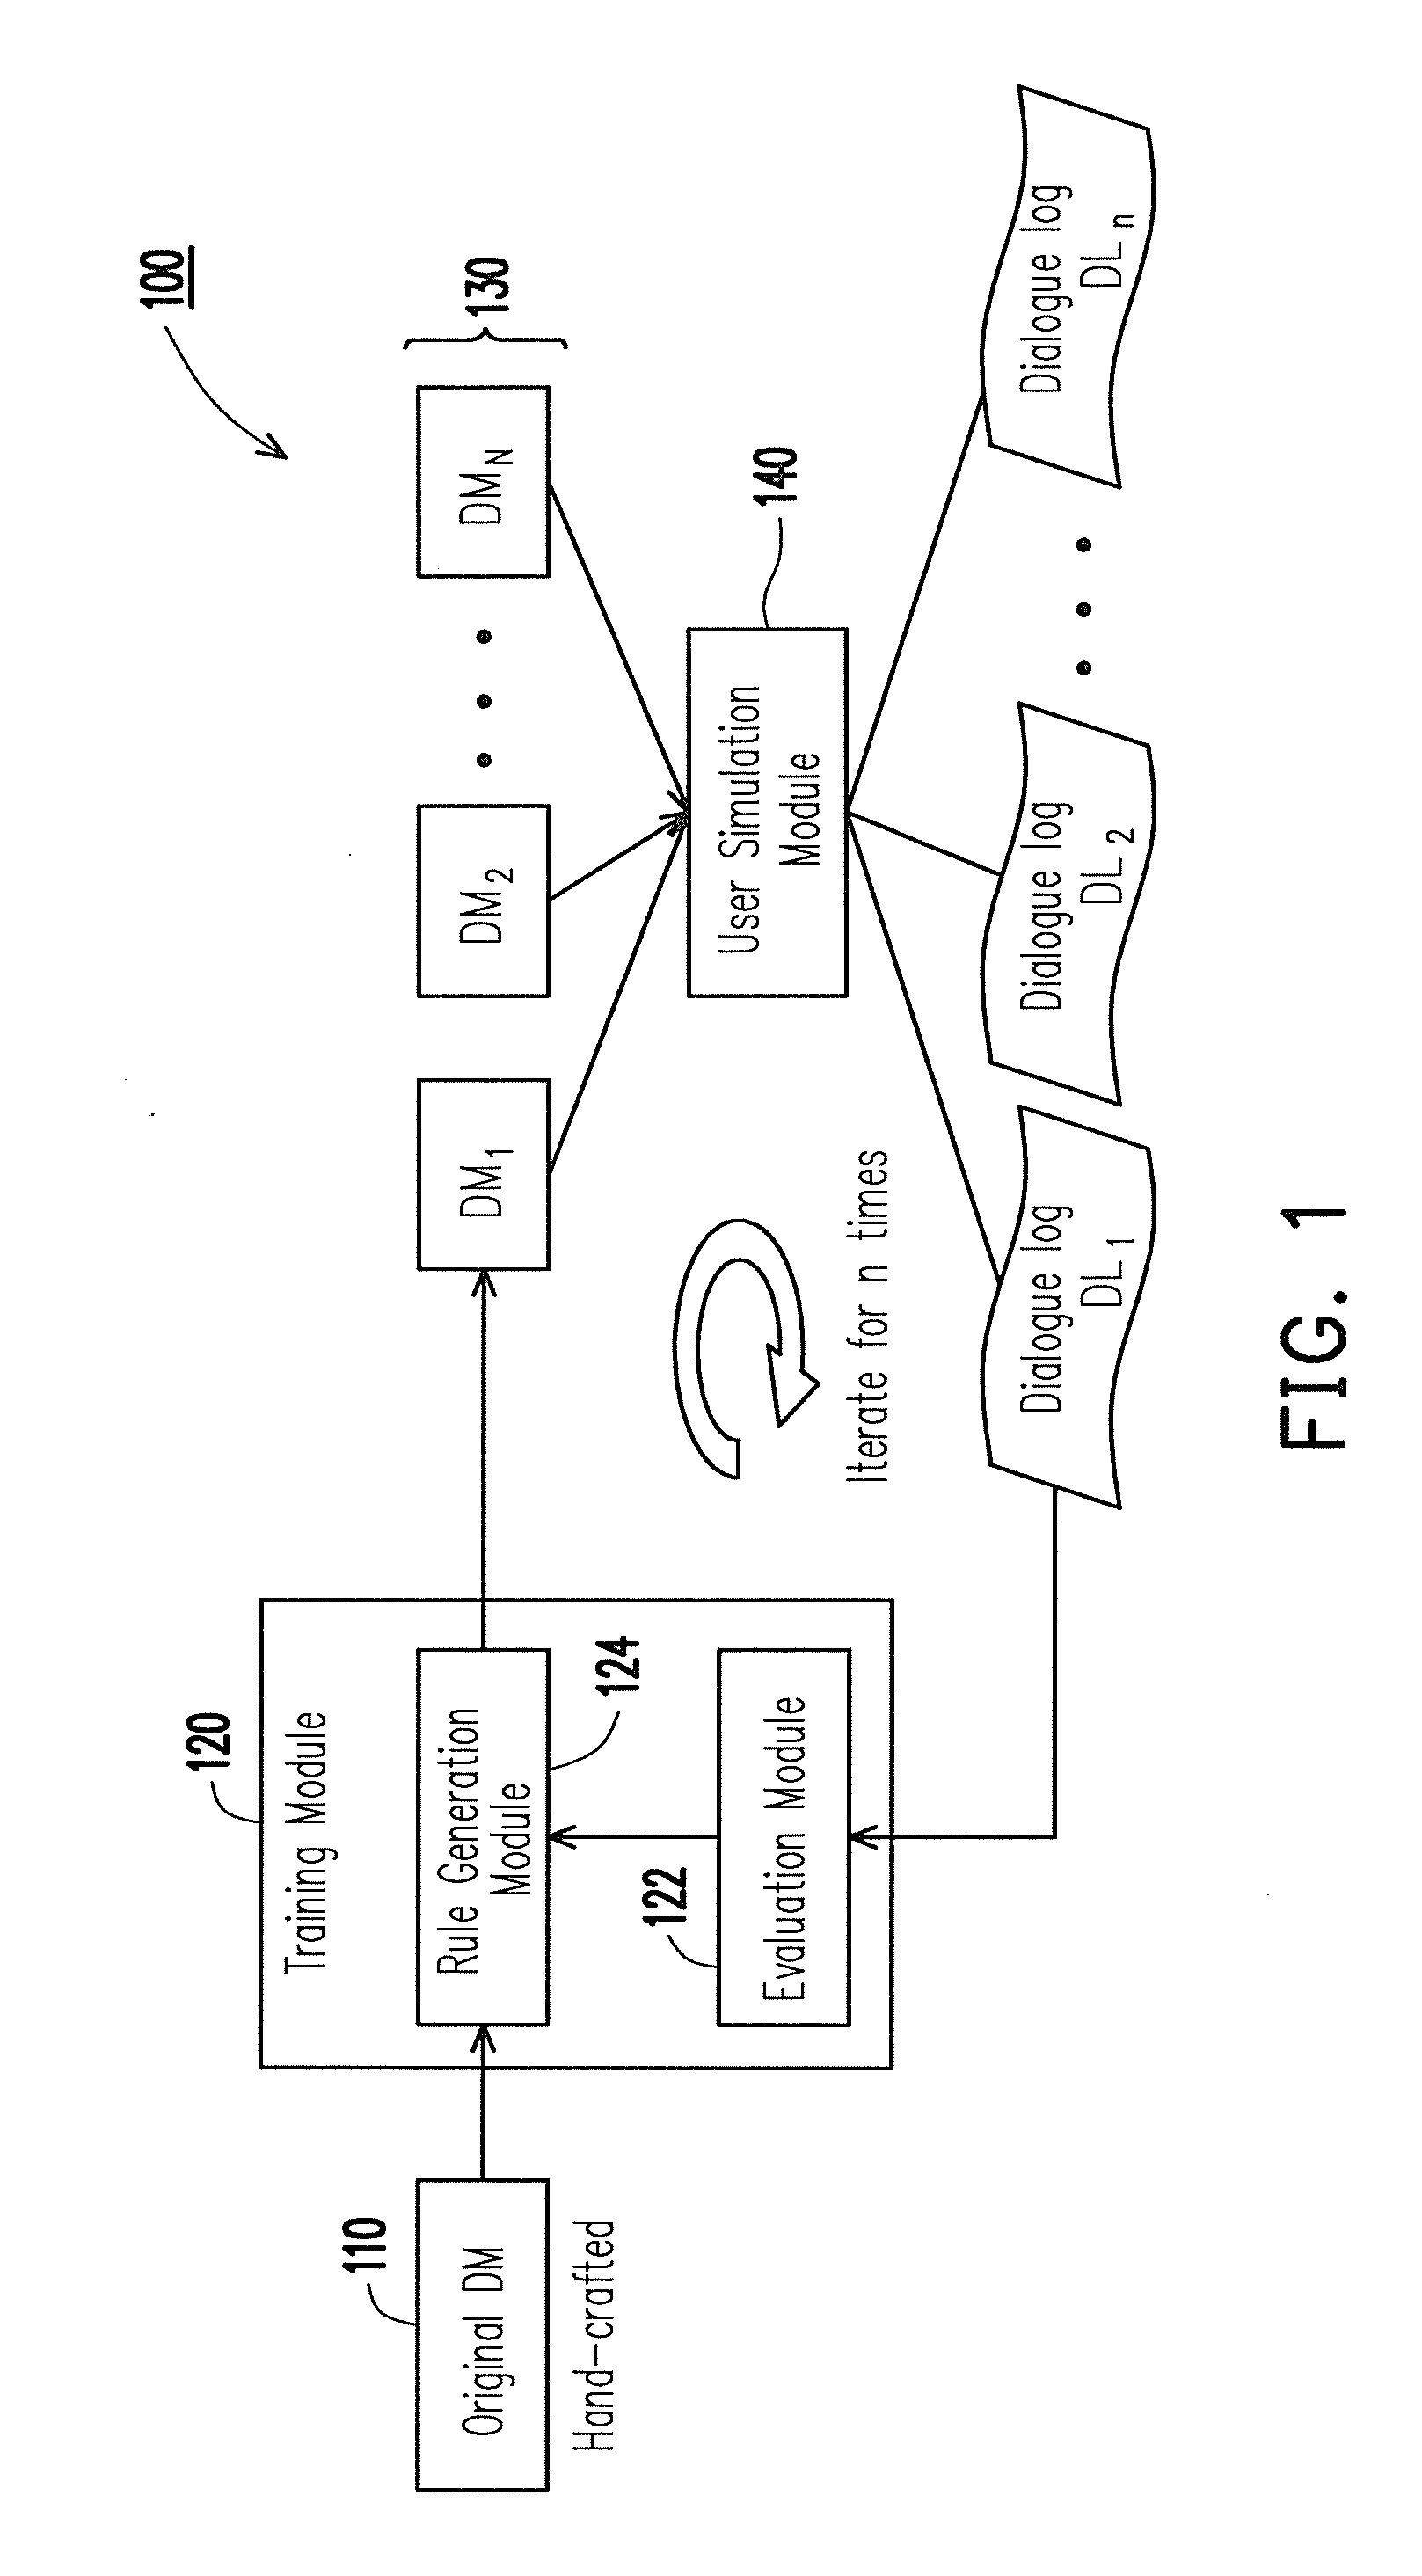 Method and system for generating dialogue managers with diversified dialogue acts